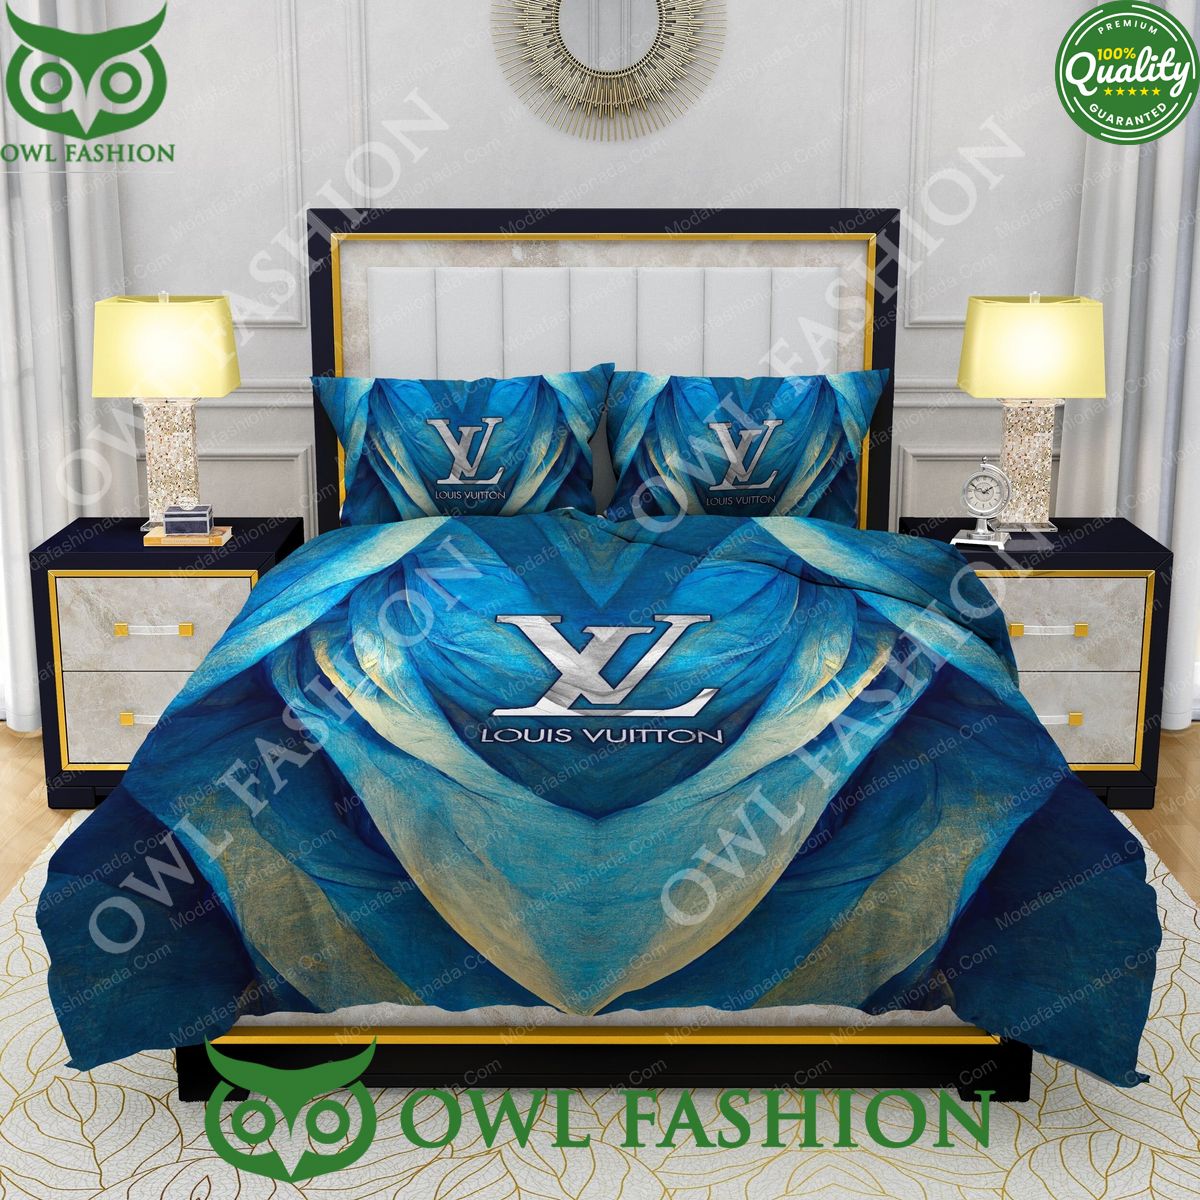 Louis Vuitton Blue Abstract Background Bedding Sets Beauty queen